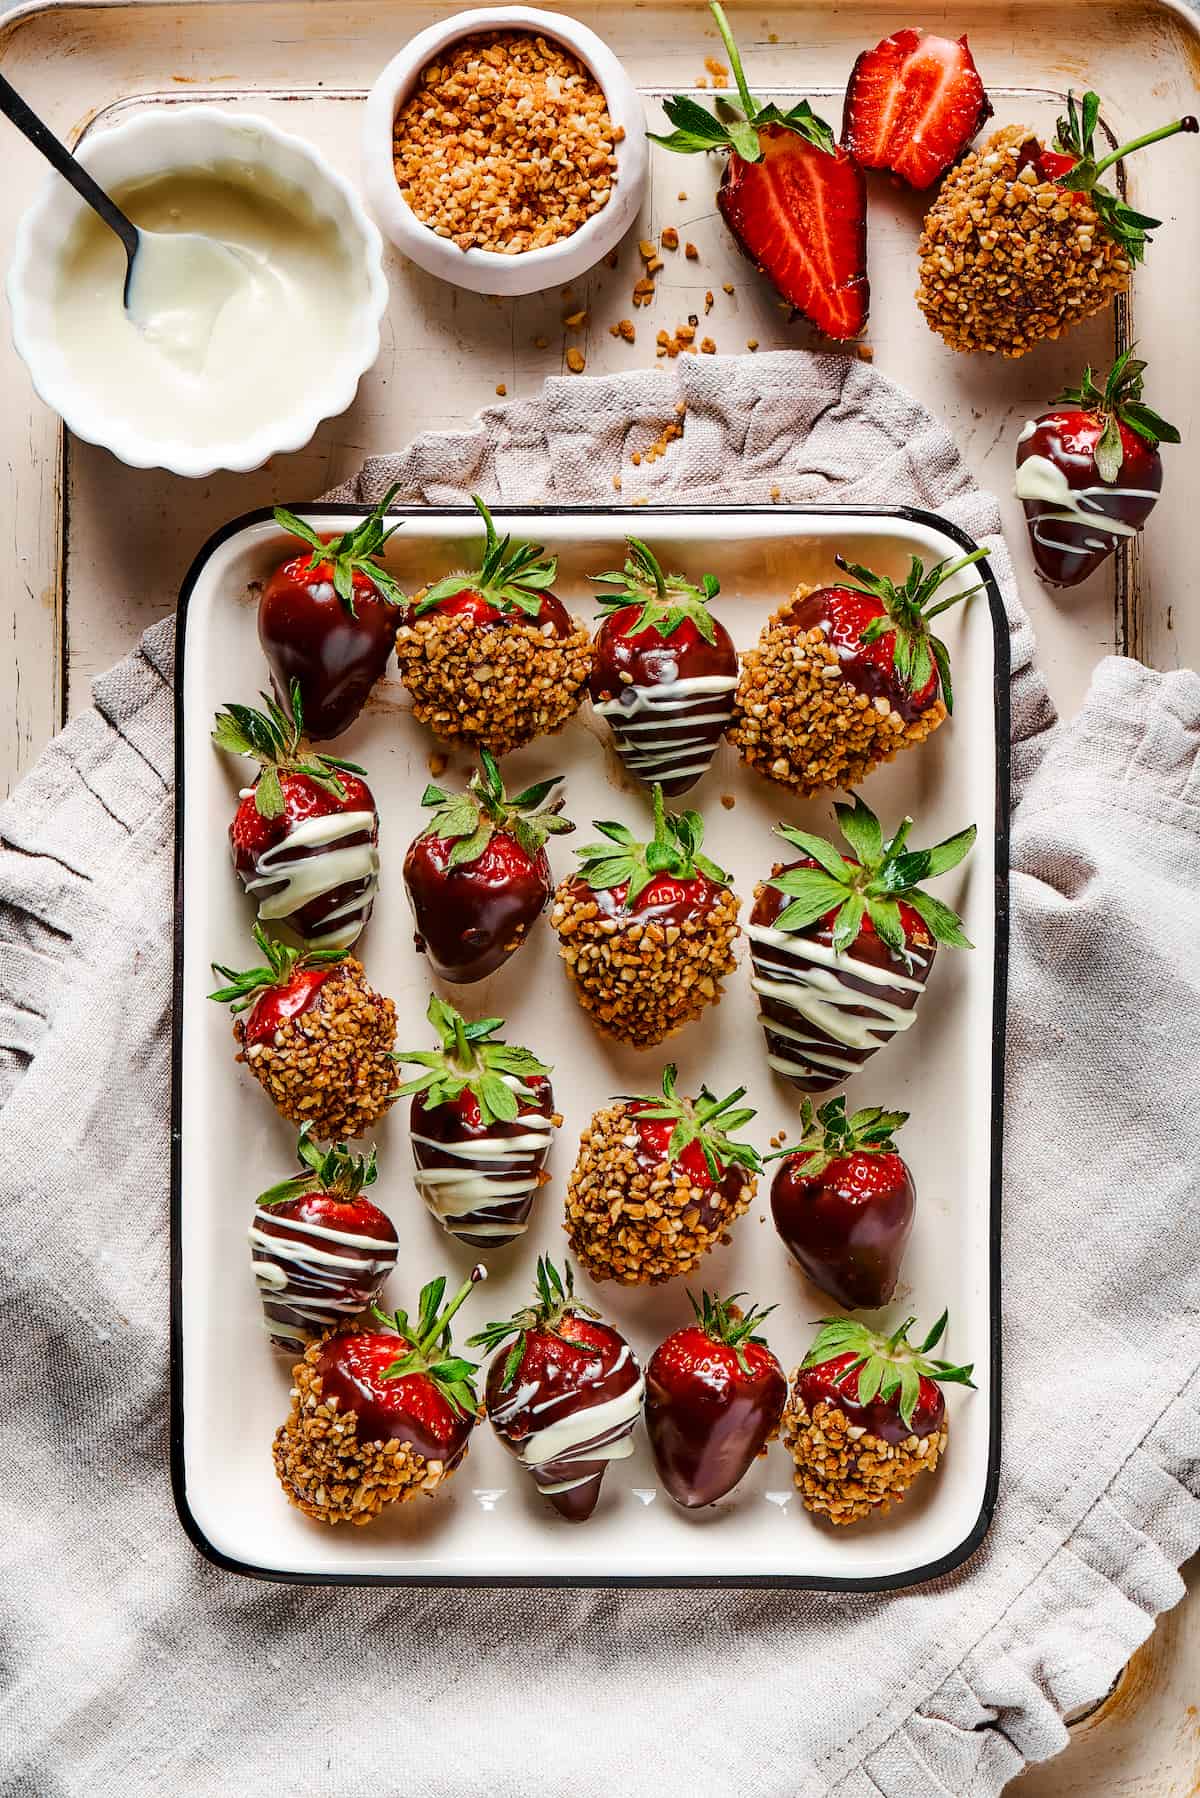 Chocolate covered strawberries on a tray, set on a decorative cloth dishtowel next to a bowl of white chocolate.